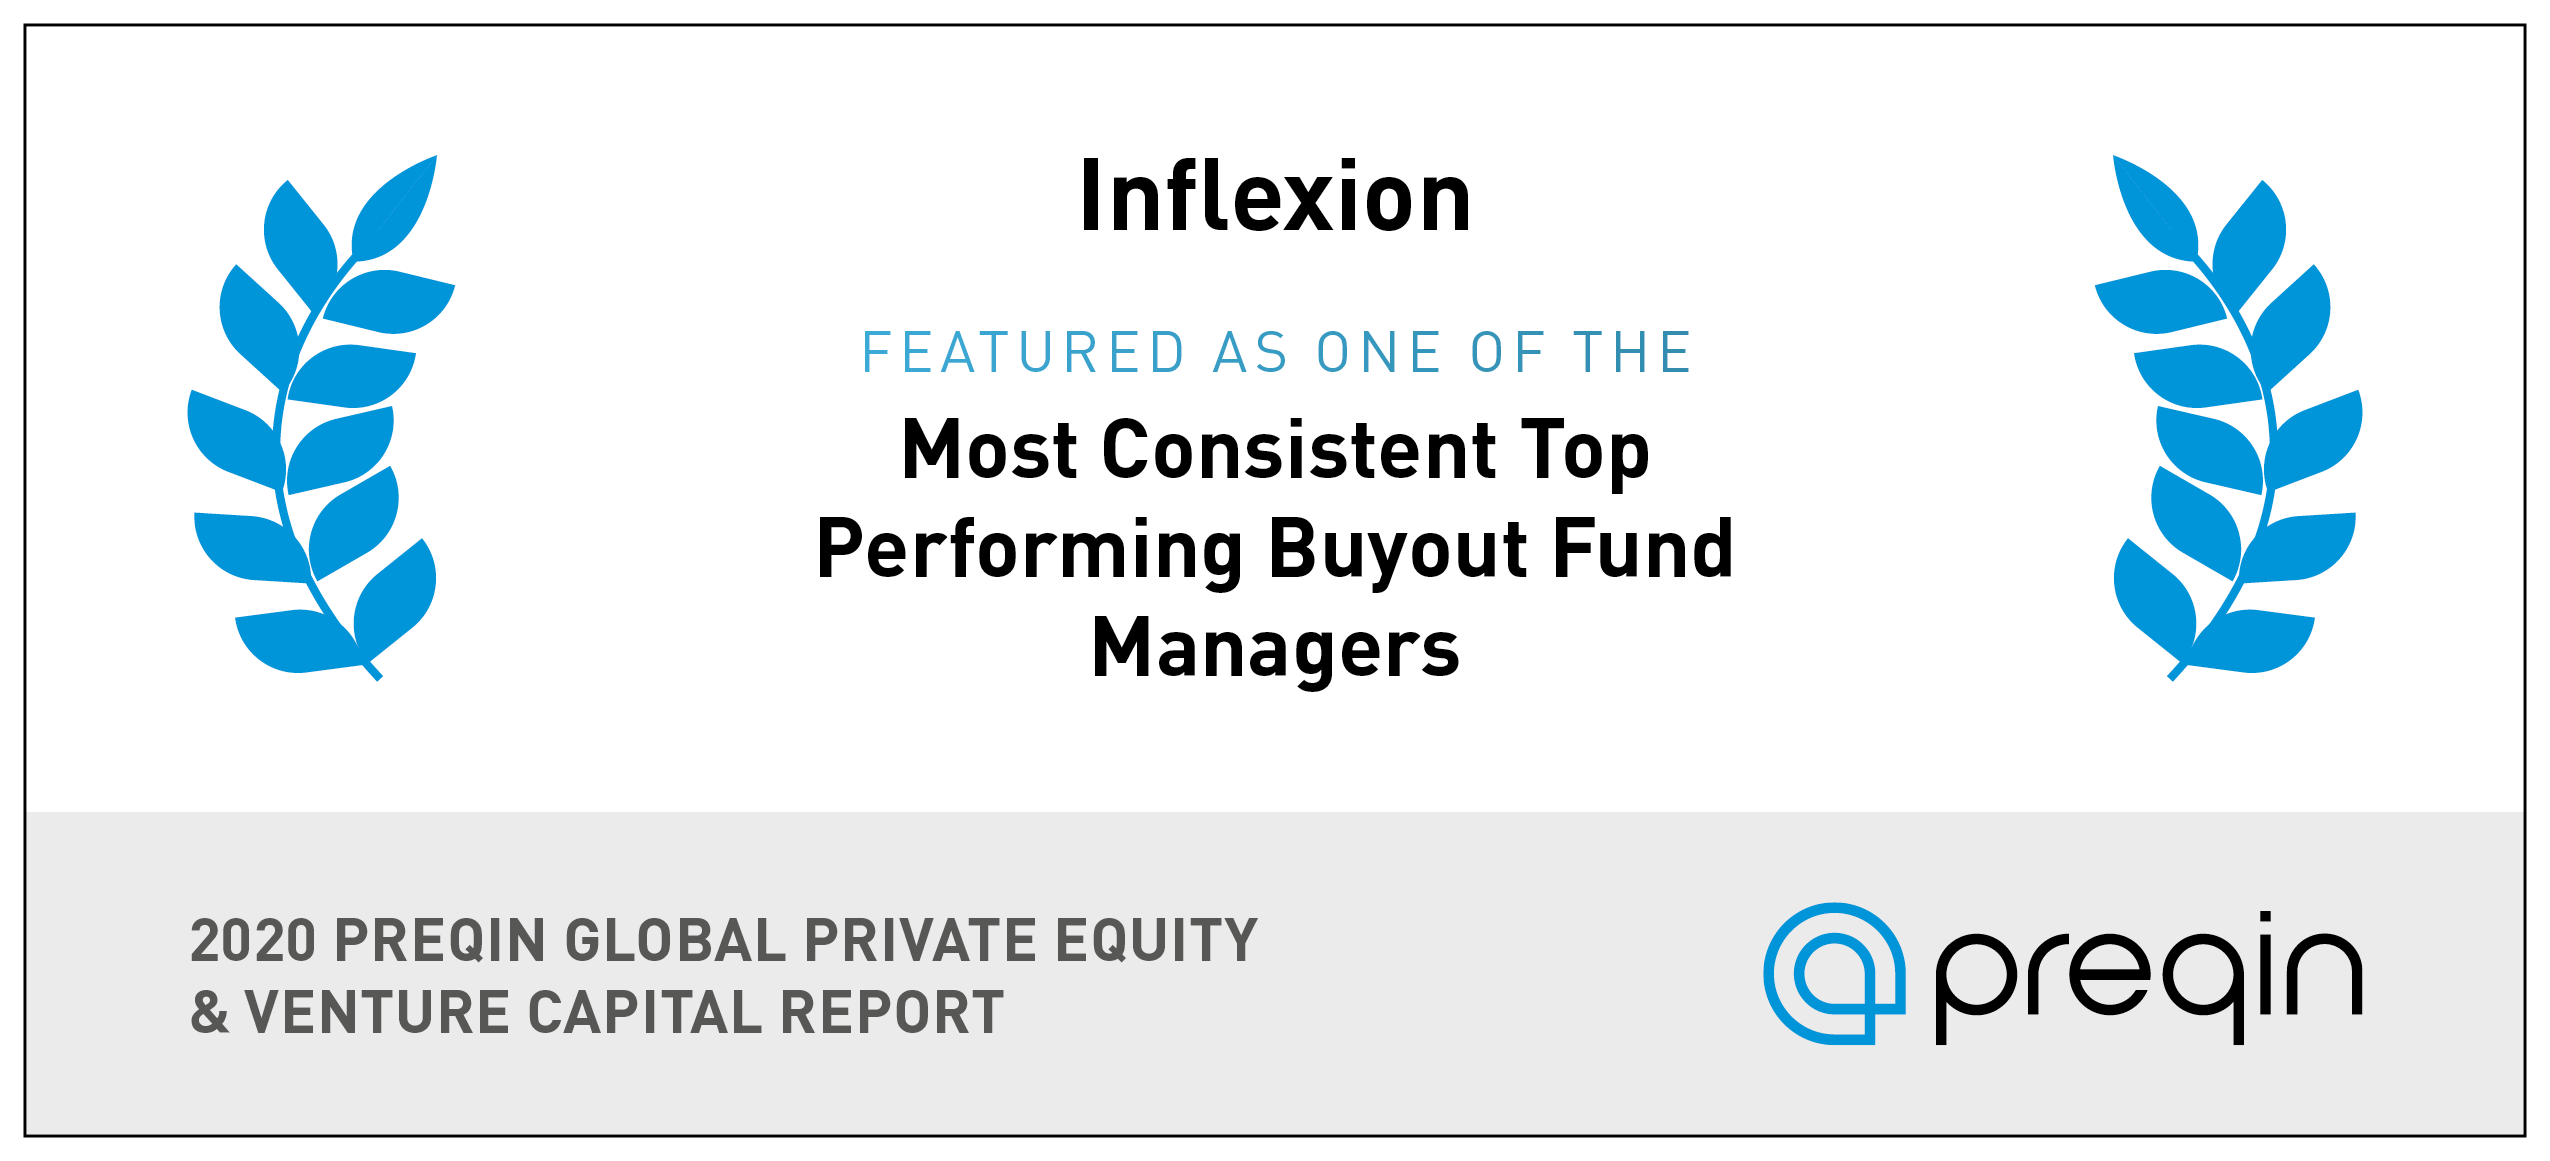 Inflexion Featured As A Top Performing Buyout Fund Manager By Prequin Inflexion